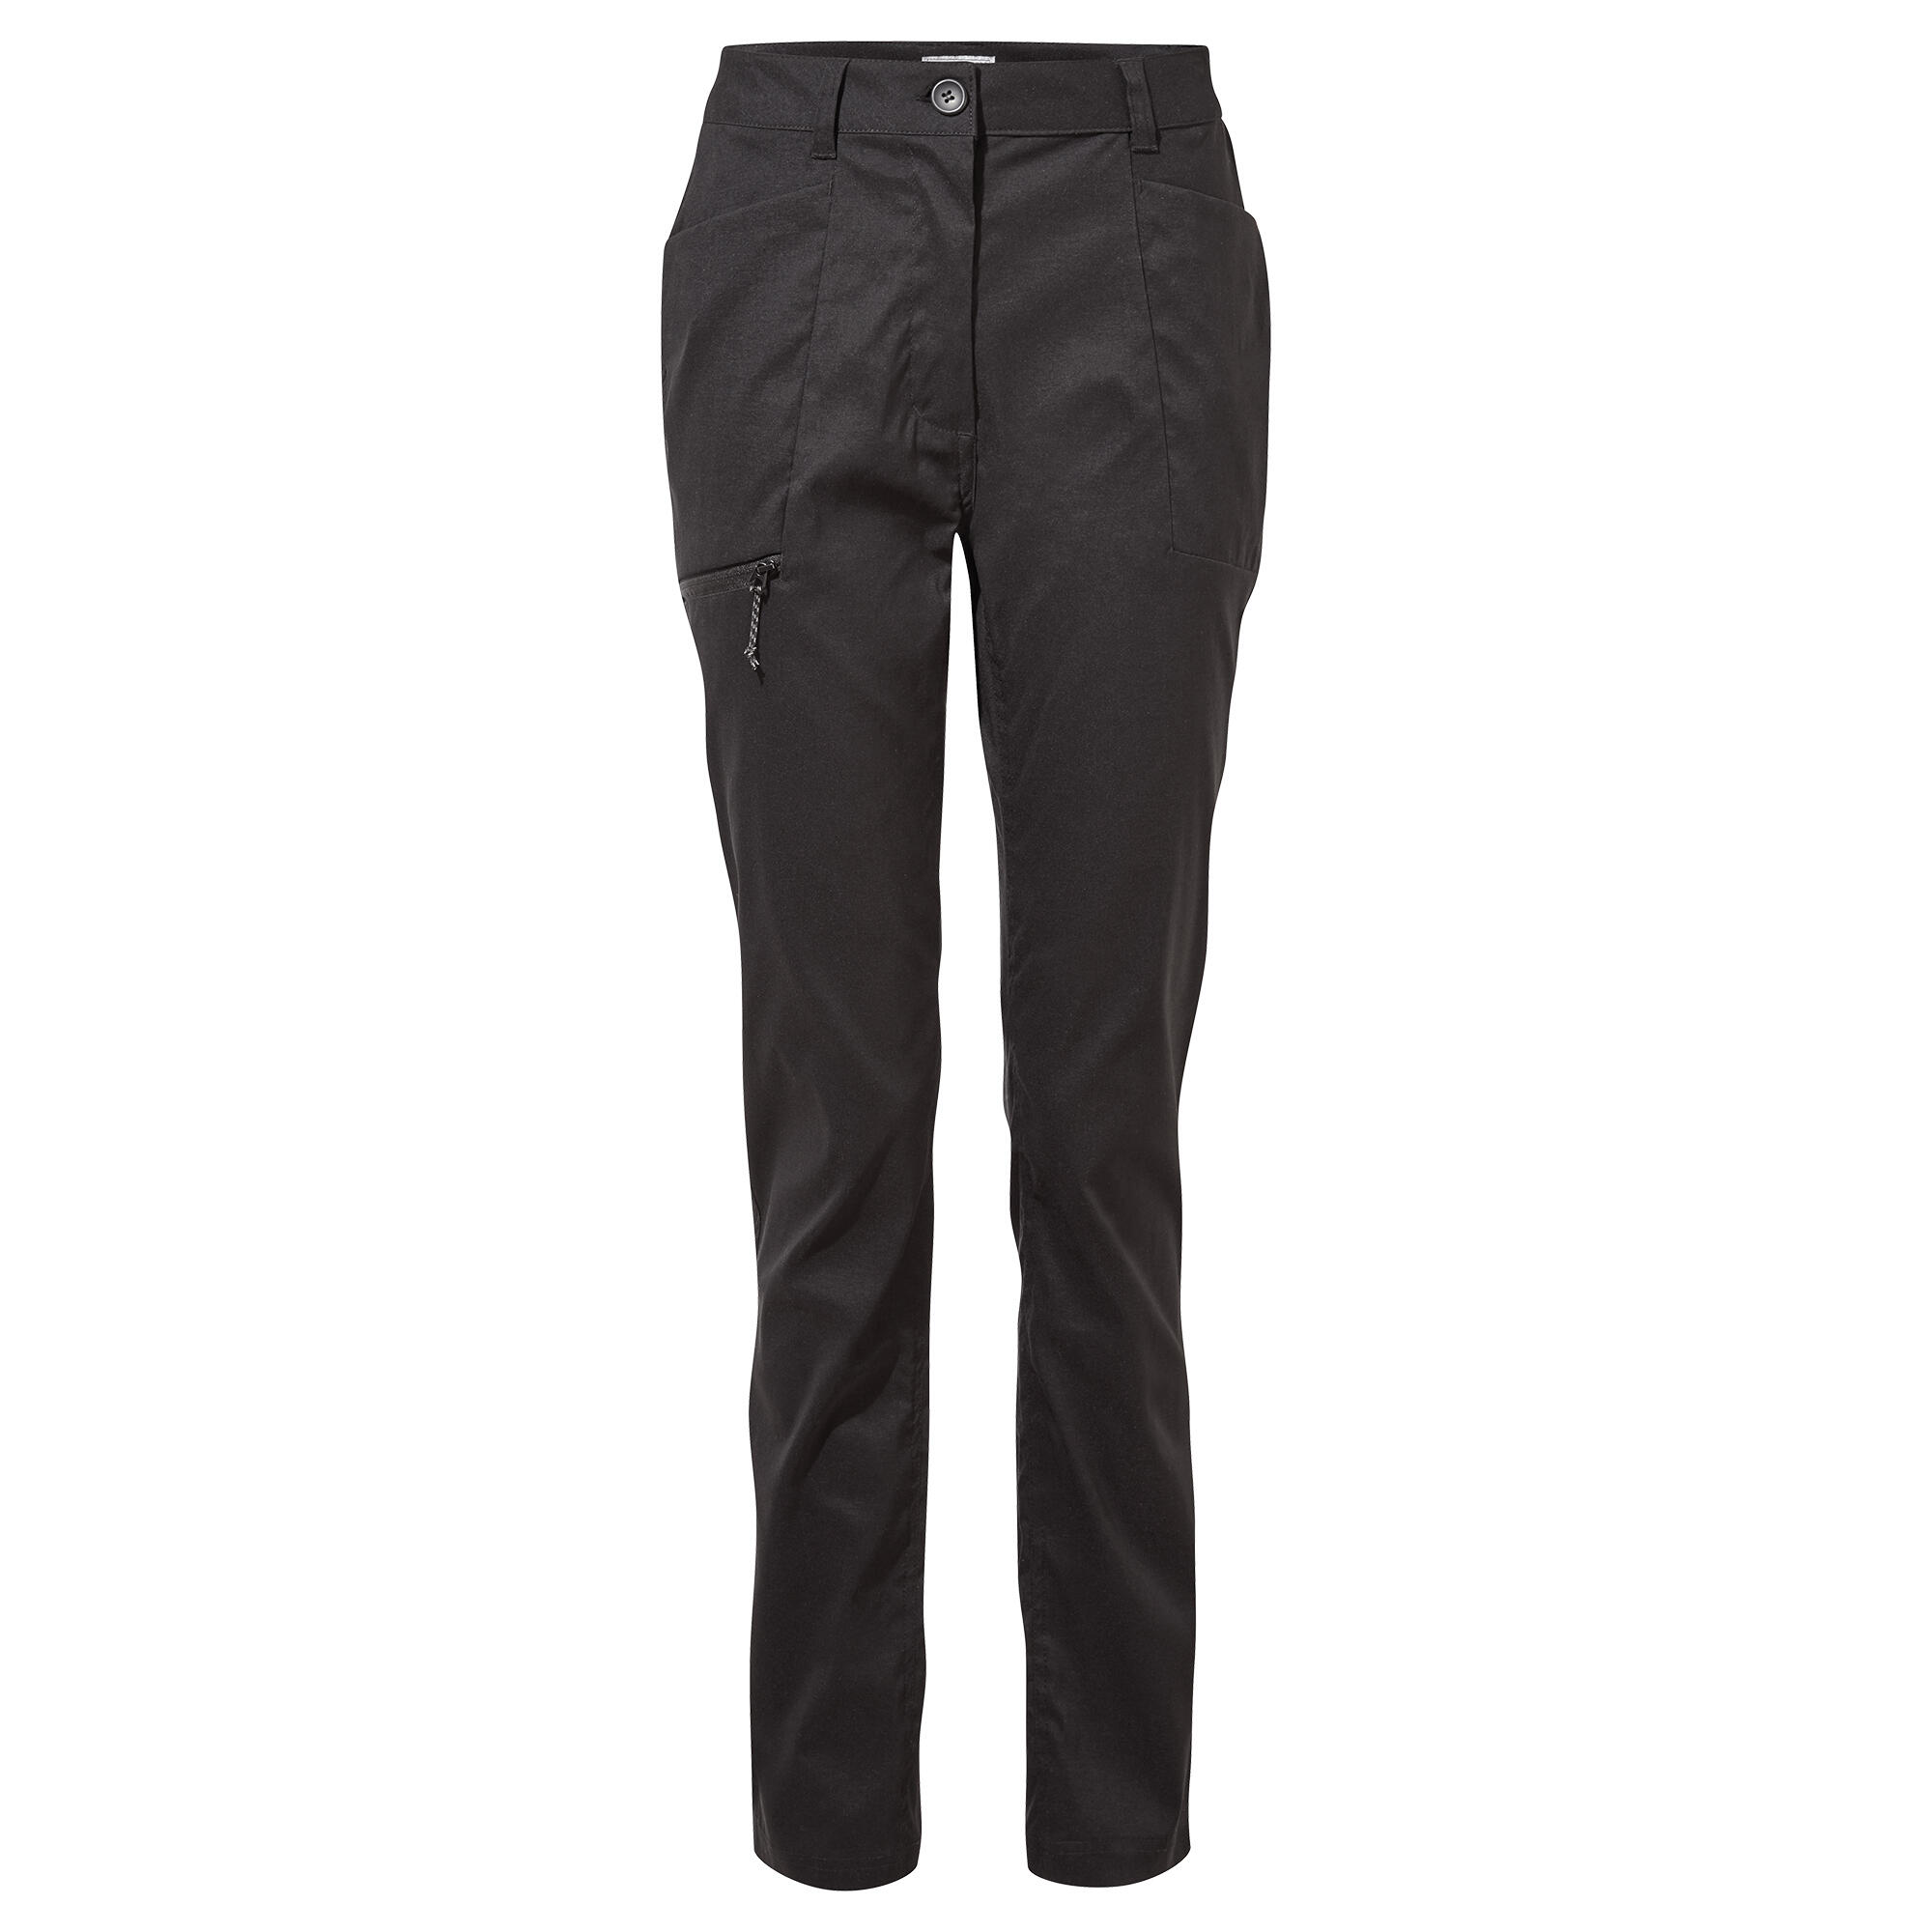 CRAGHOPPERS Women's Kiwi Pro High Waisted Trousers